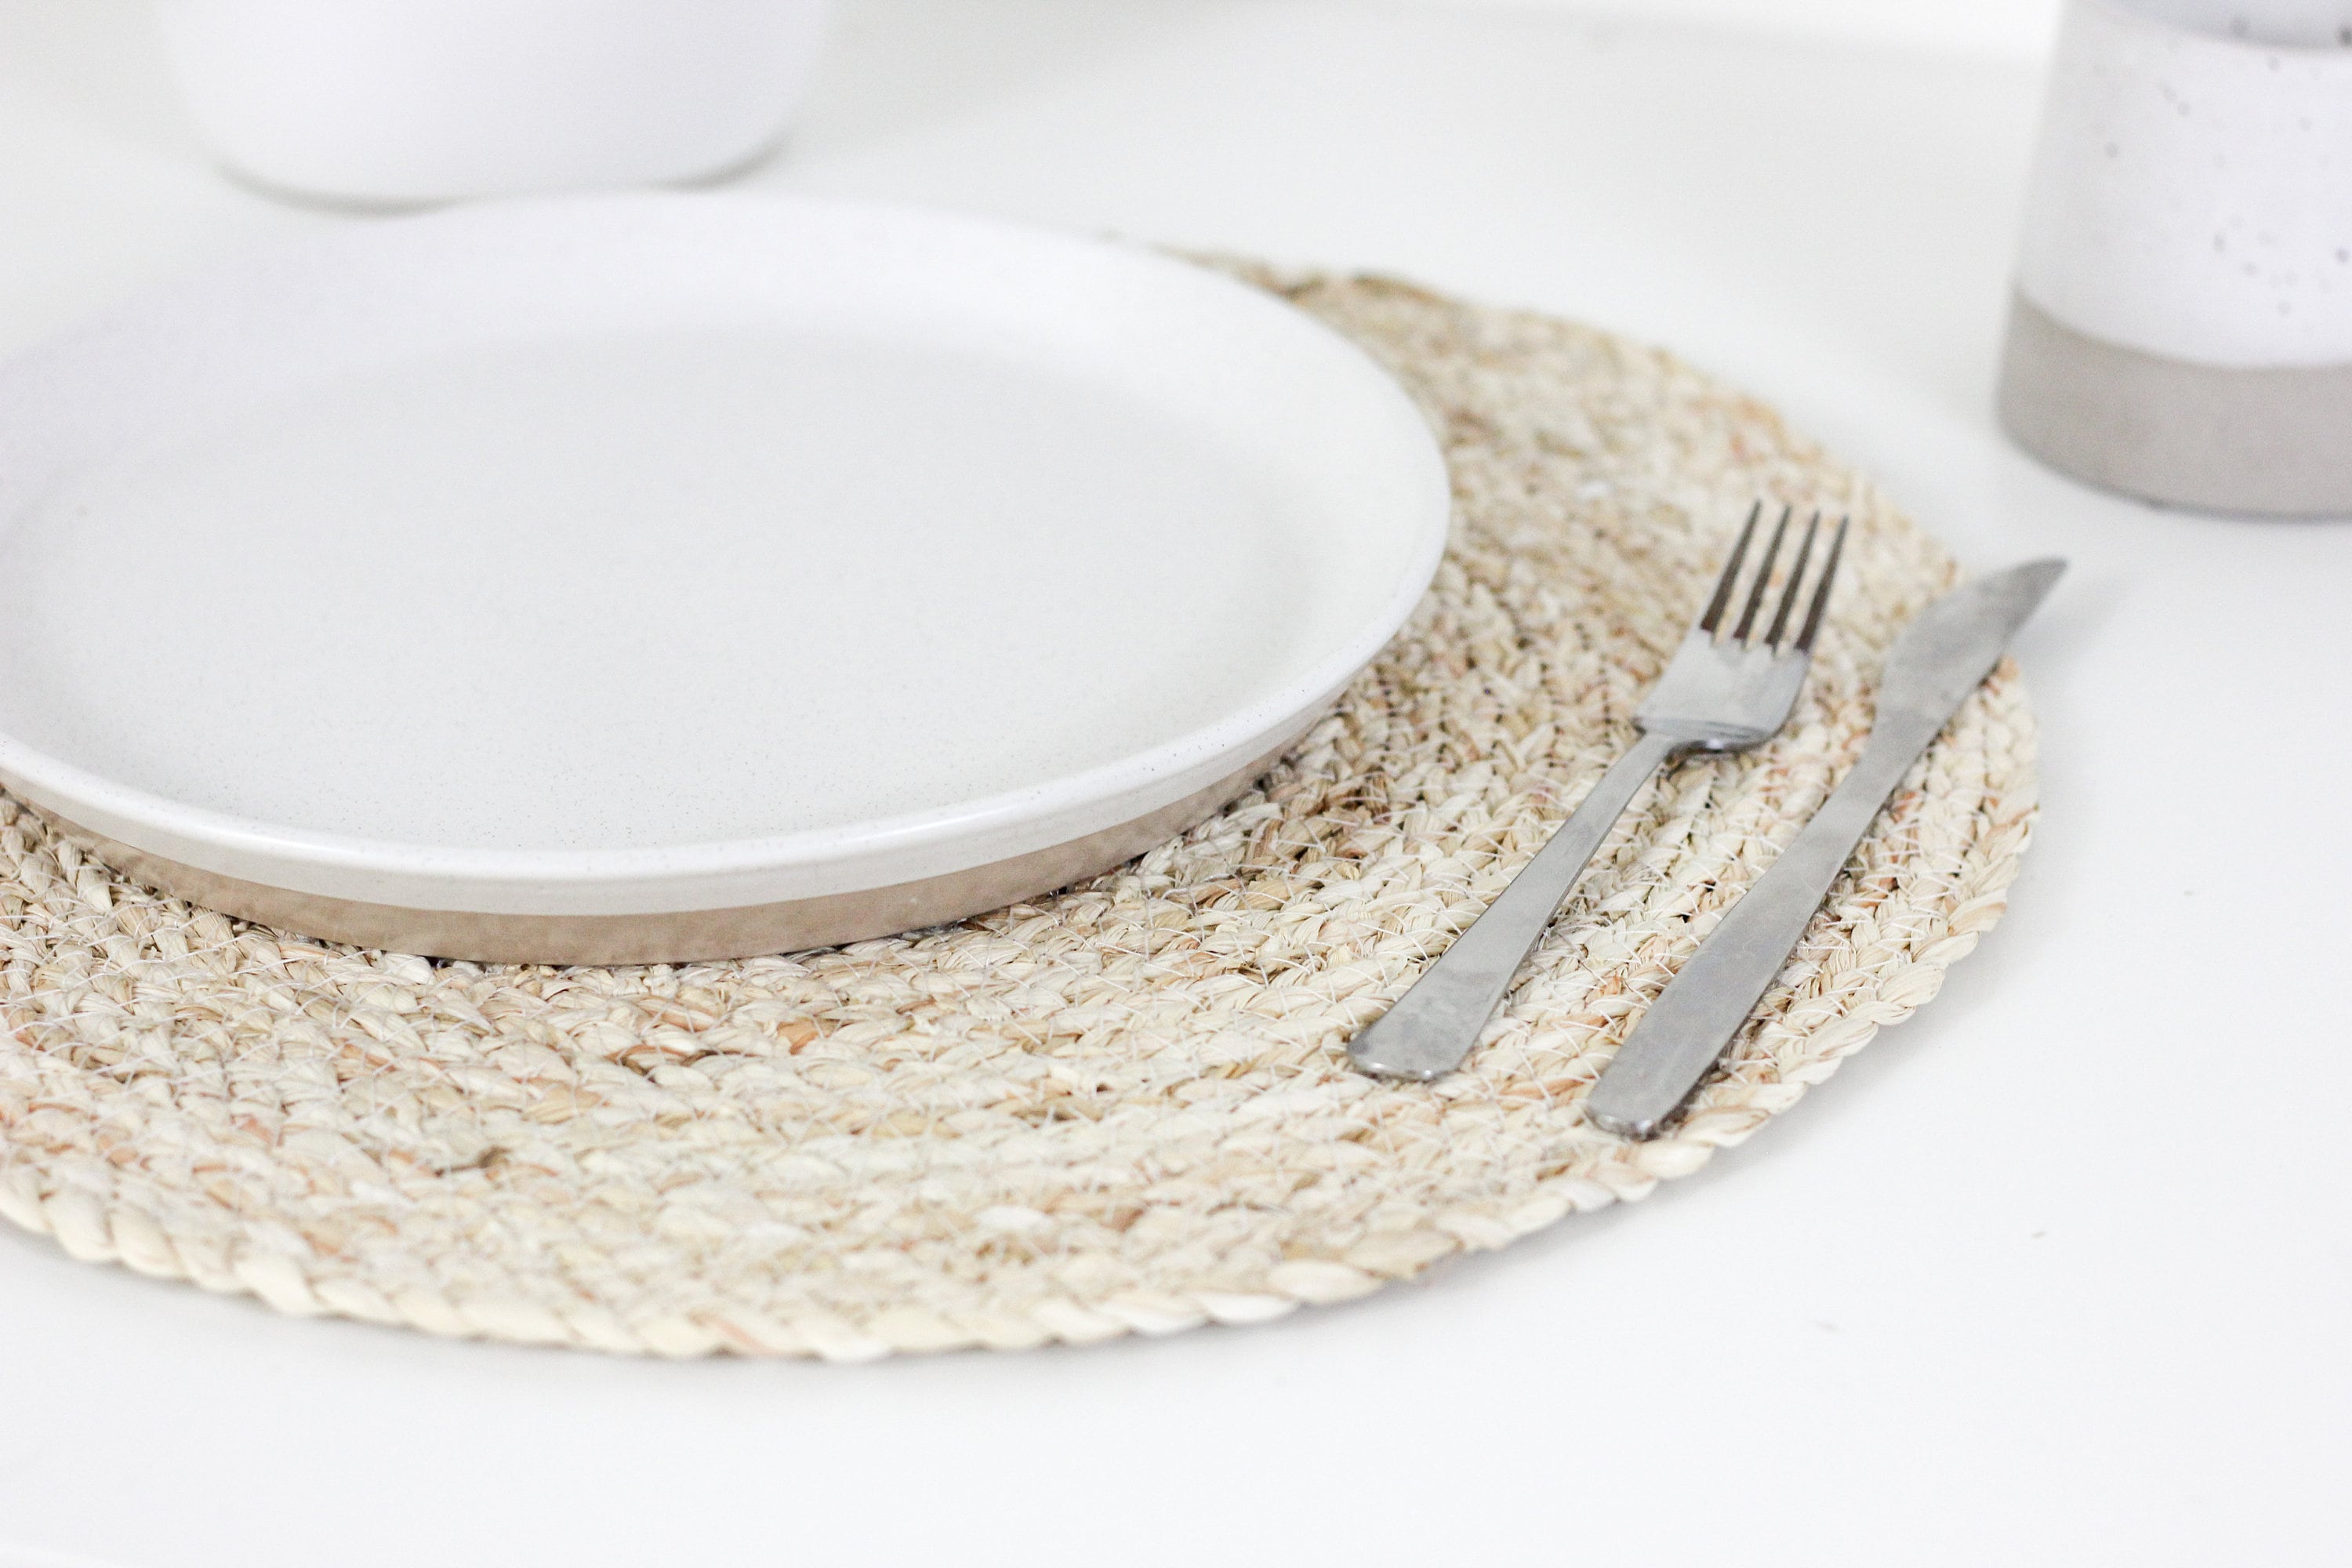 Contrast Jute Braided Round Placemat Neutral Dining Decor